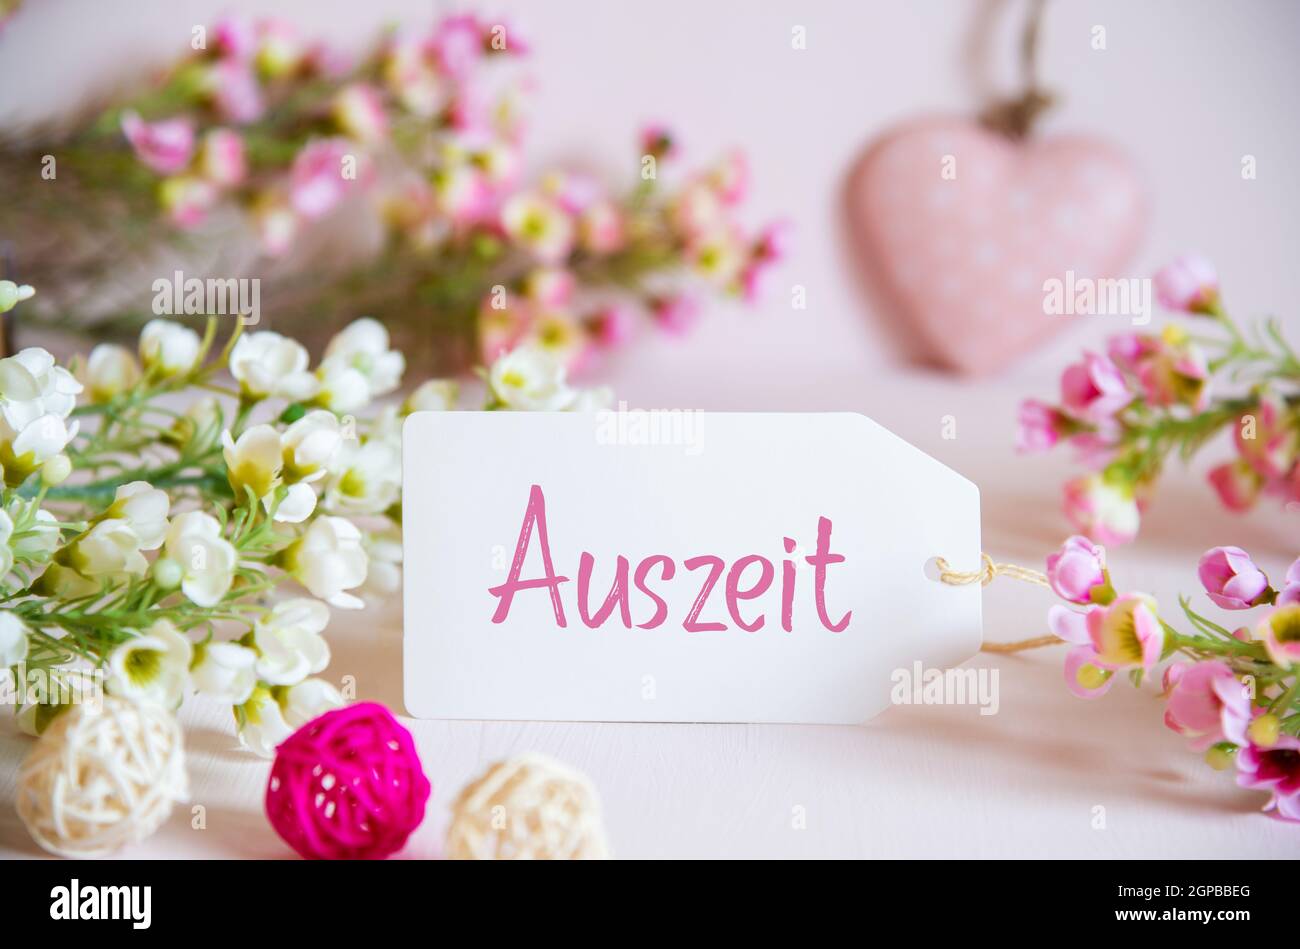 Label With German Text Auszeit Means Downtime. Rose And White Flowers With Heart Decoration. Stock Photo